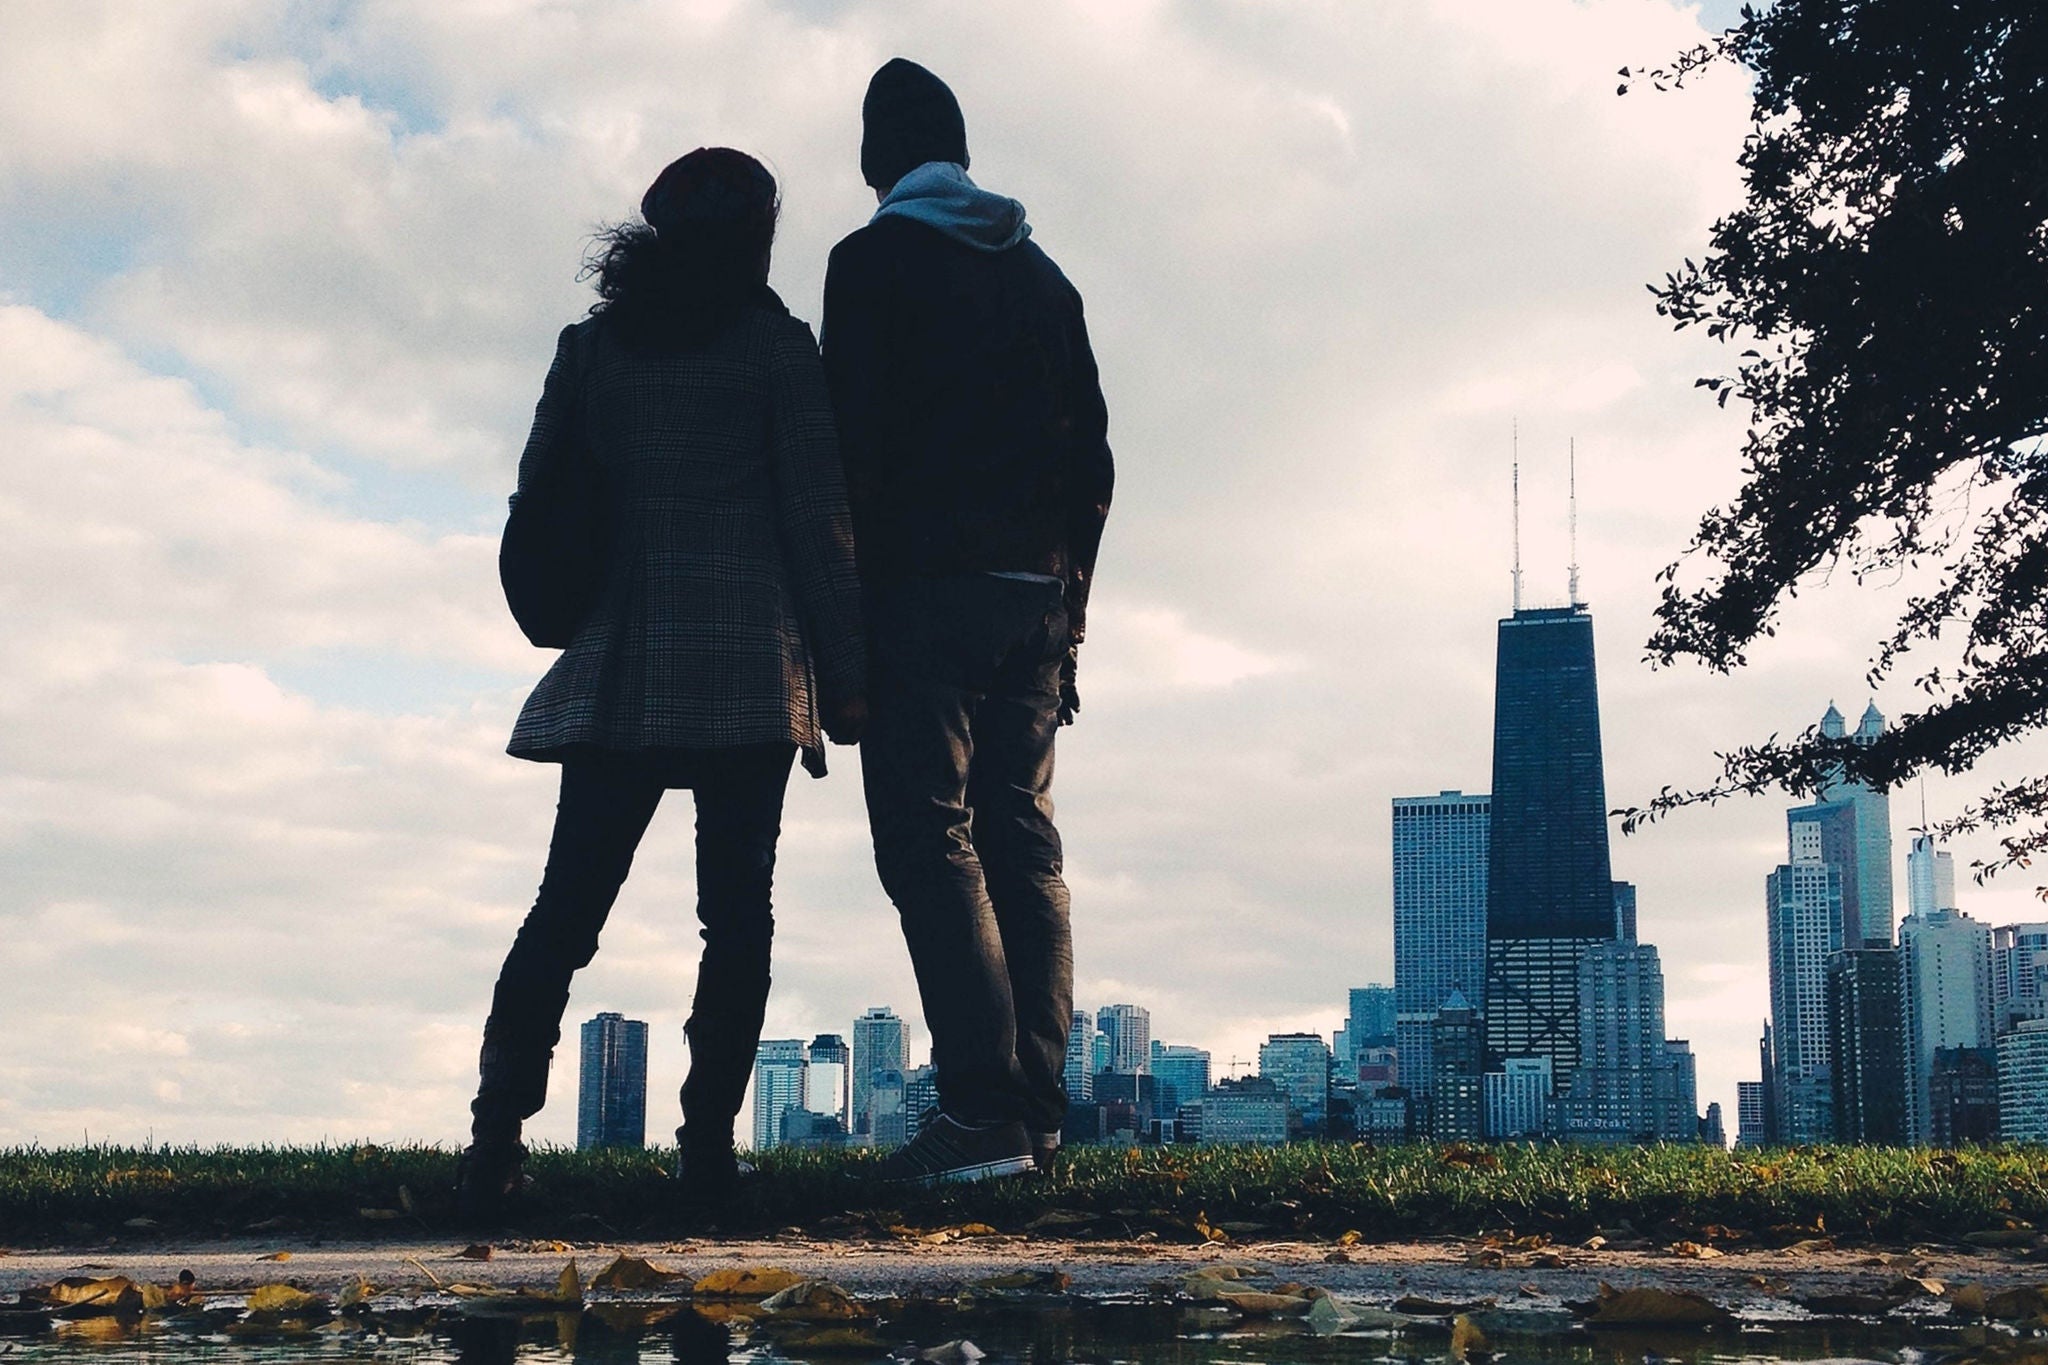 Rear View Of Man And Woman Looking At Cityscape Against Cloudy Sky